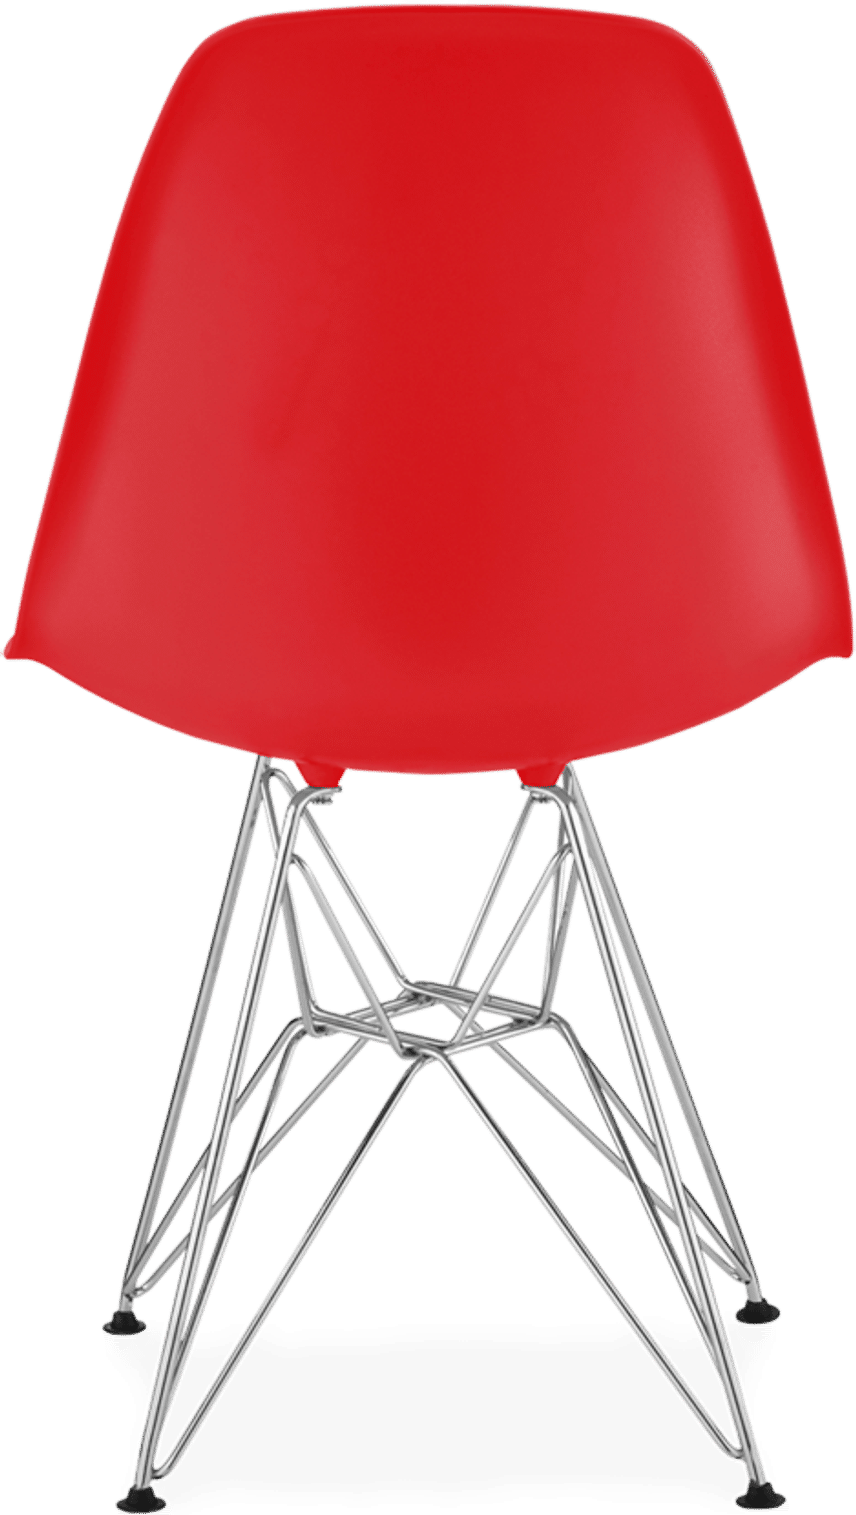 DSR Style Chair Red image.